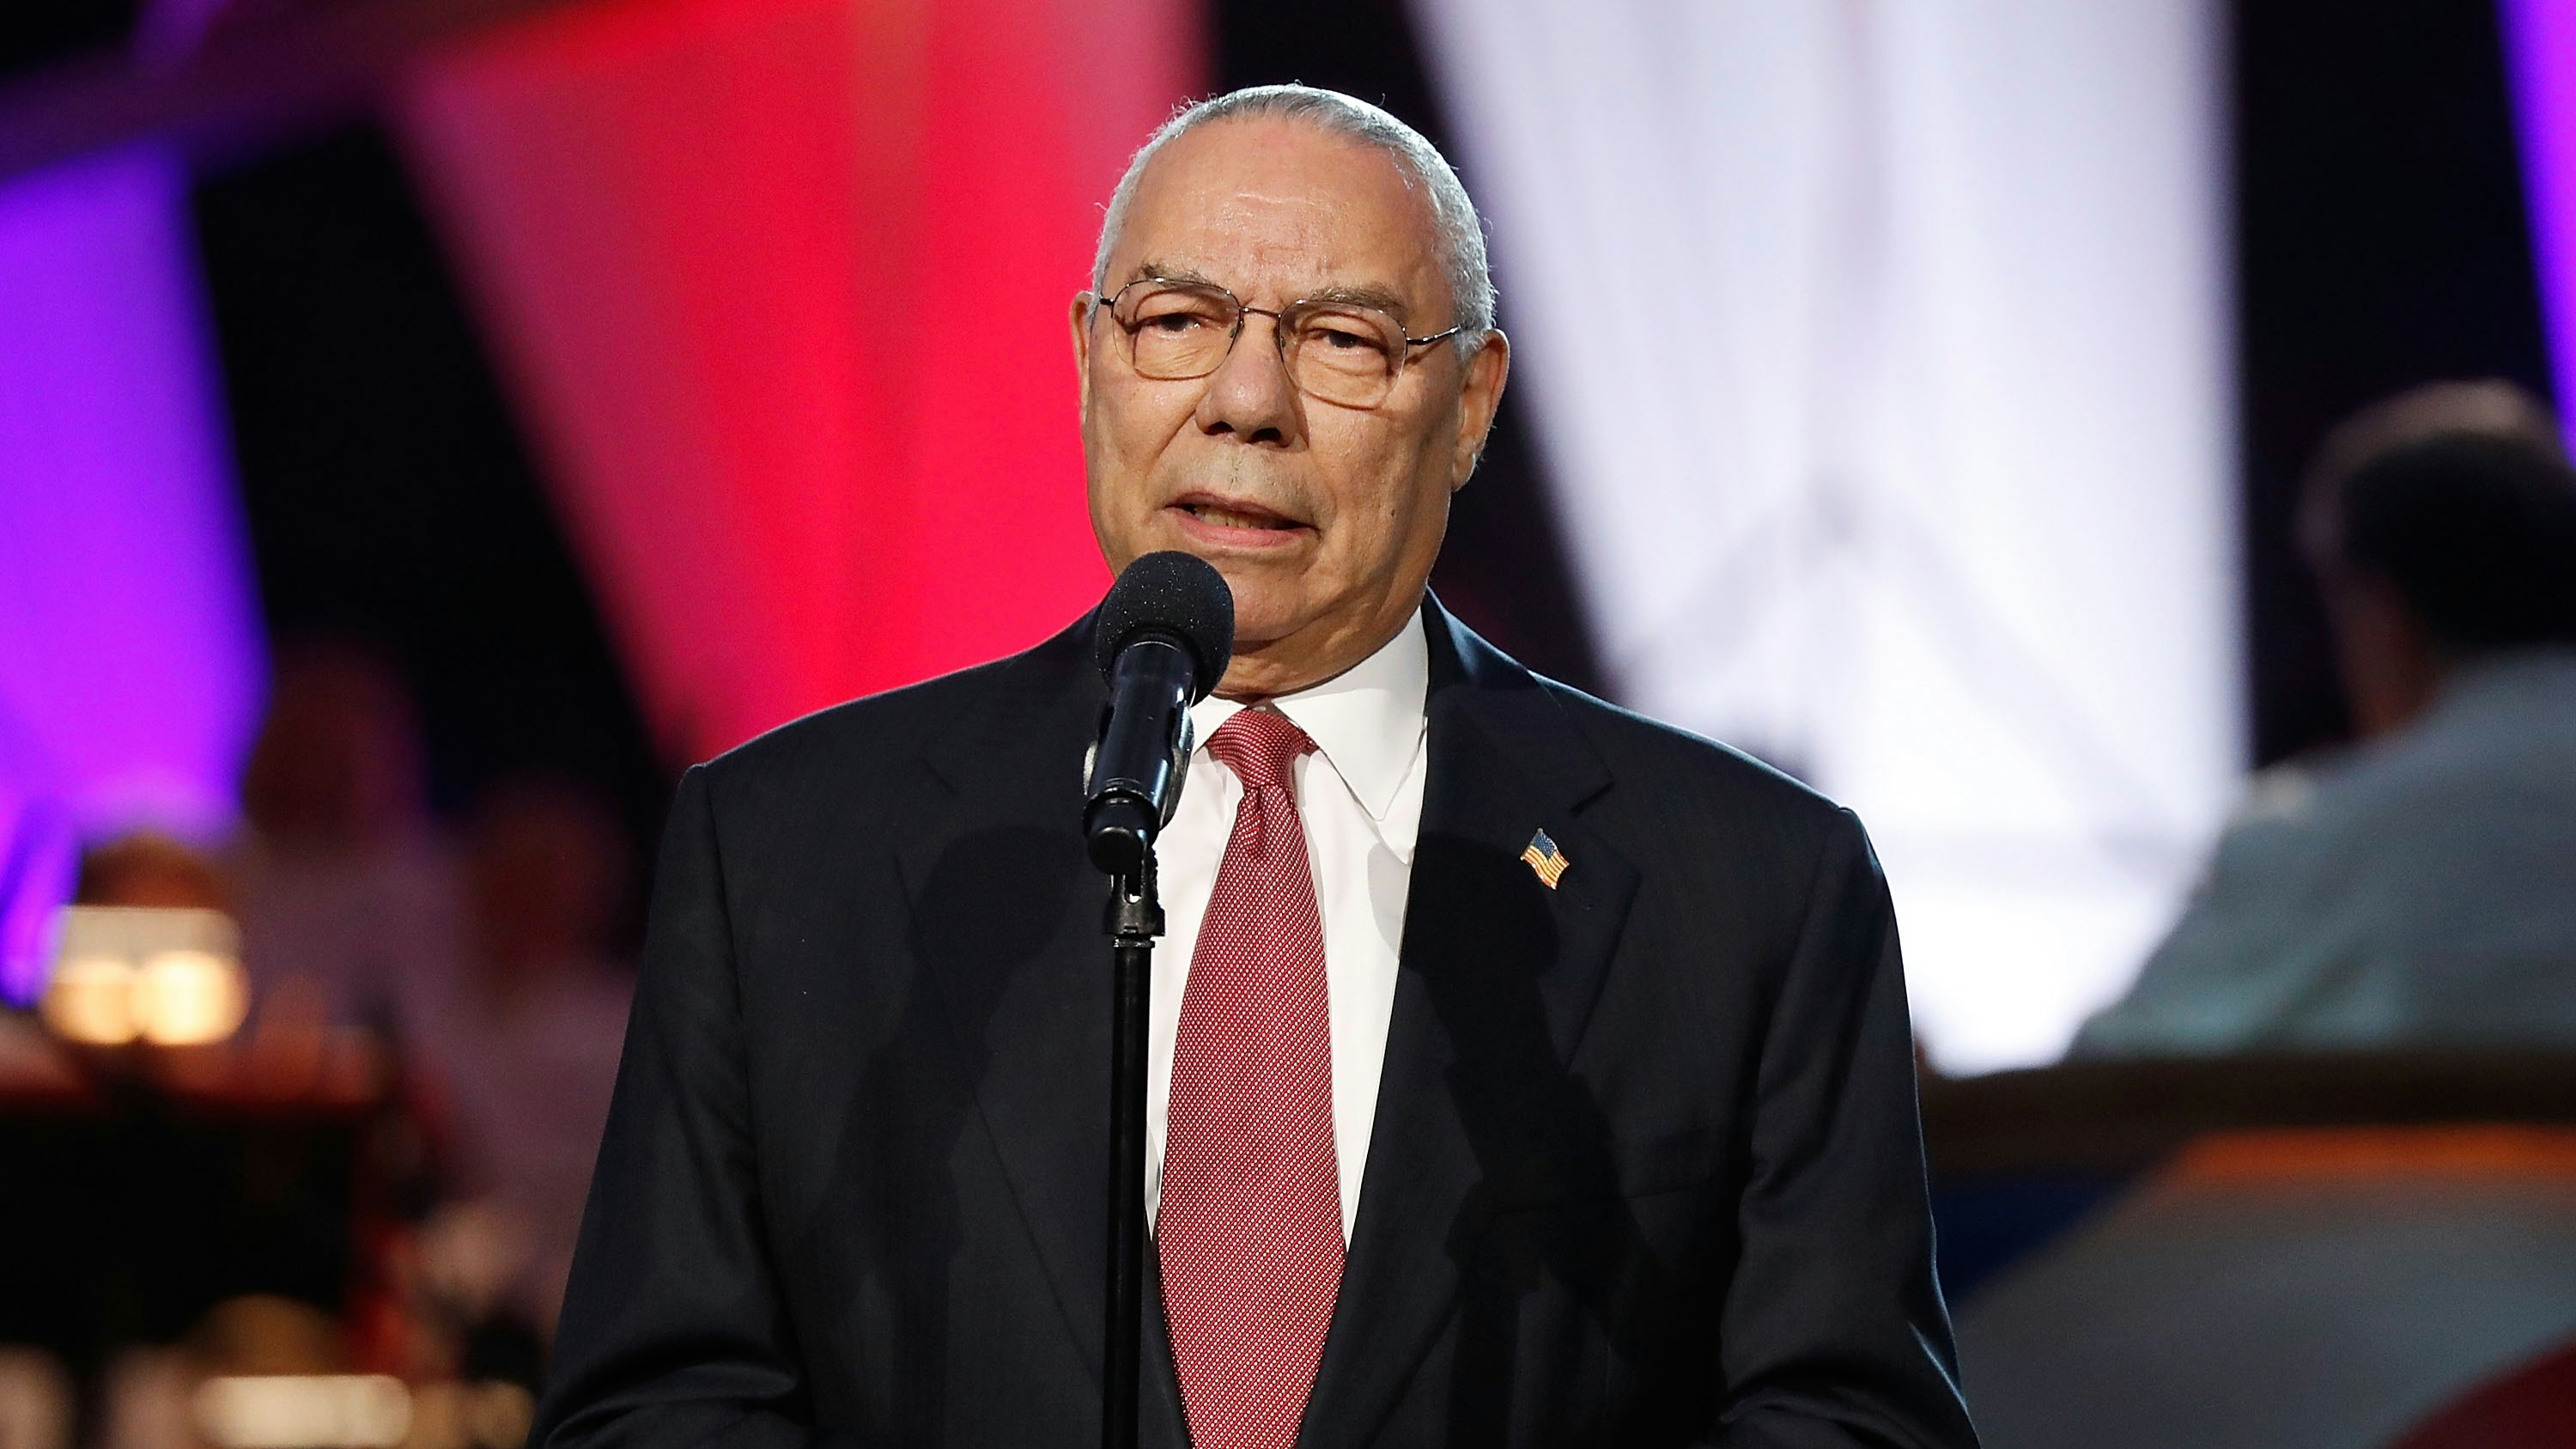 Distinguished American leader General Colin L. Powell, USA (Ret.) speaks during the 2018 National Memorial Day Concert